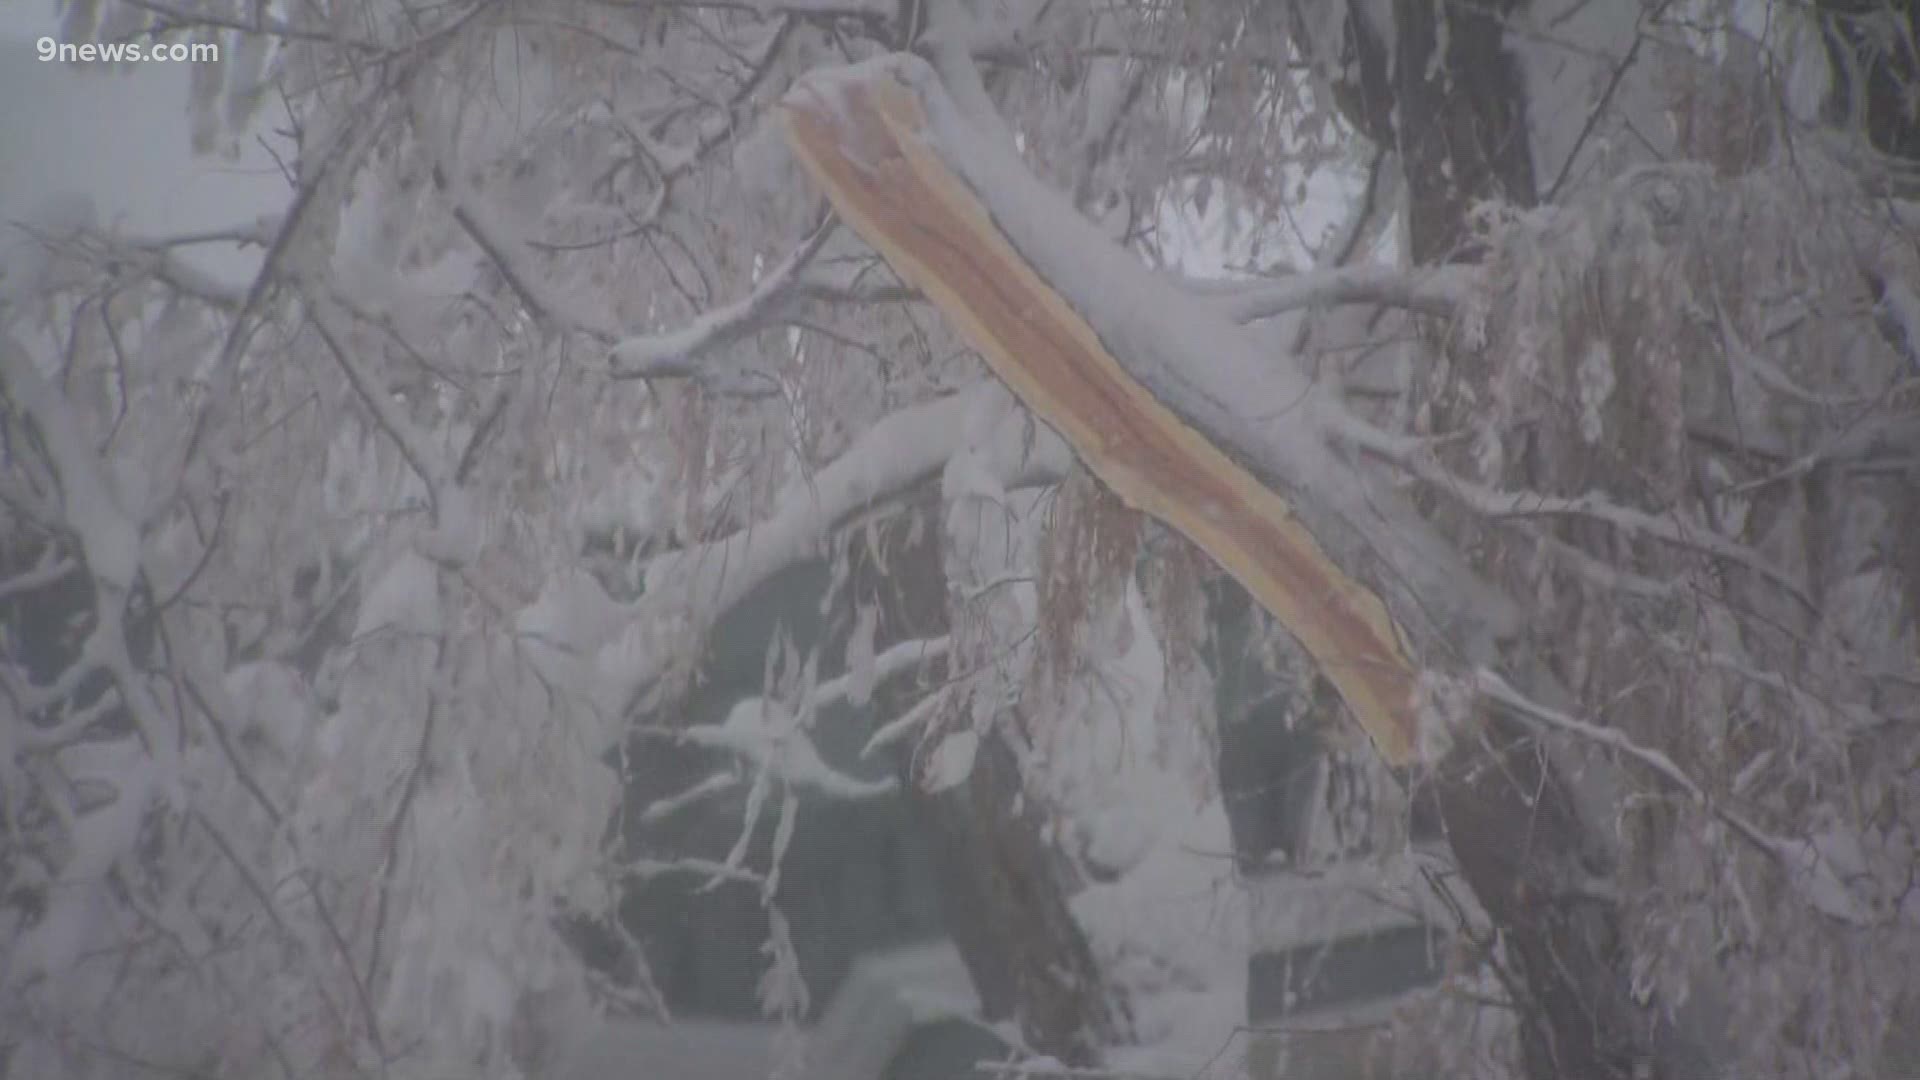 Heavy, wet snow caused some trouble for Colorado tree branches.